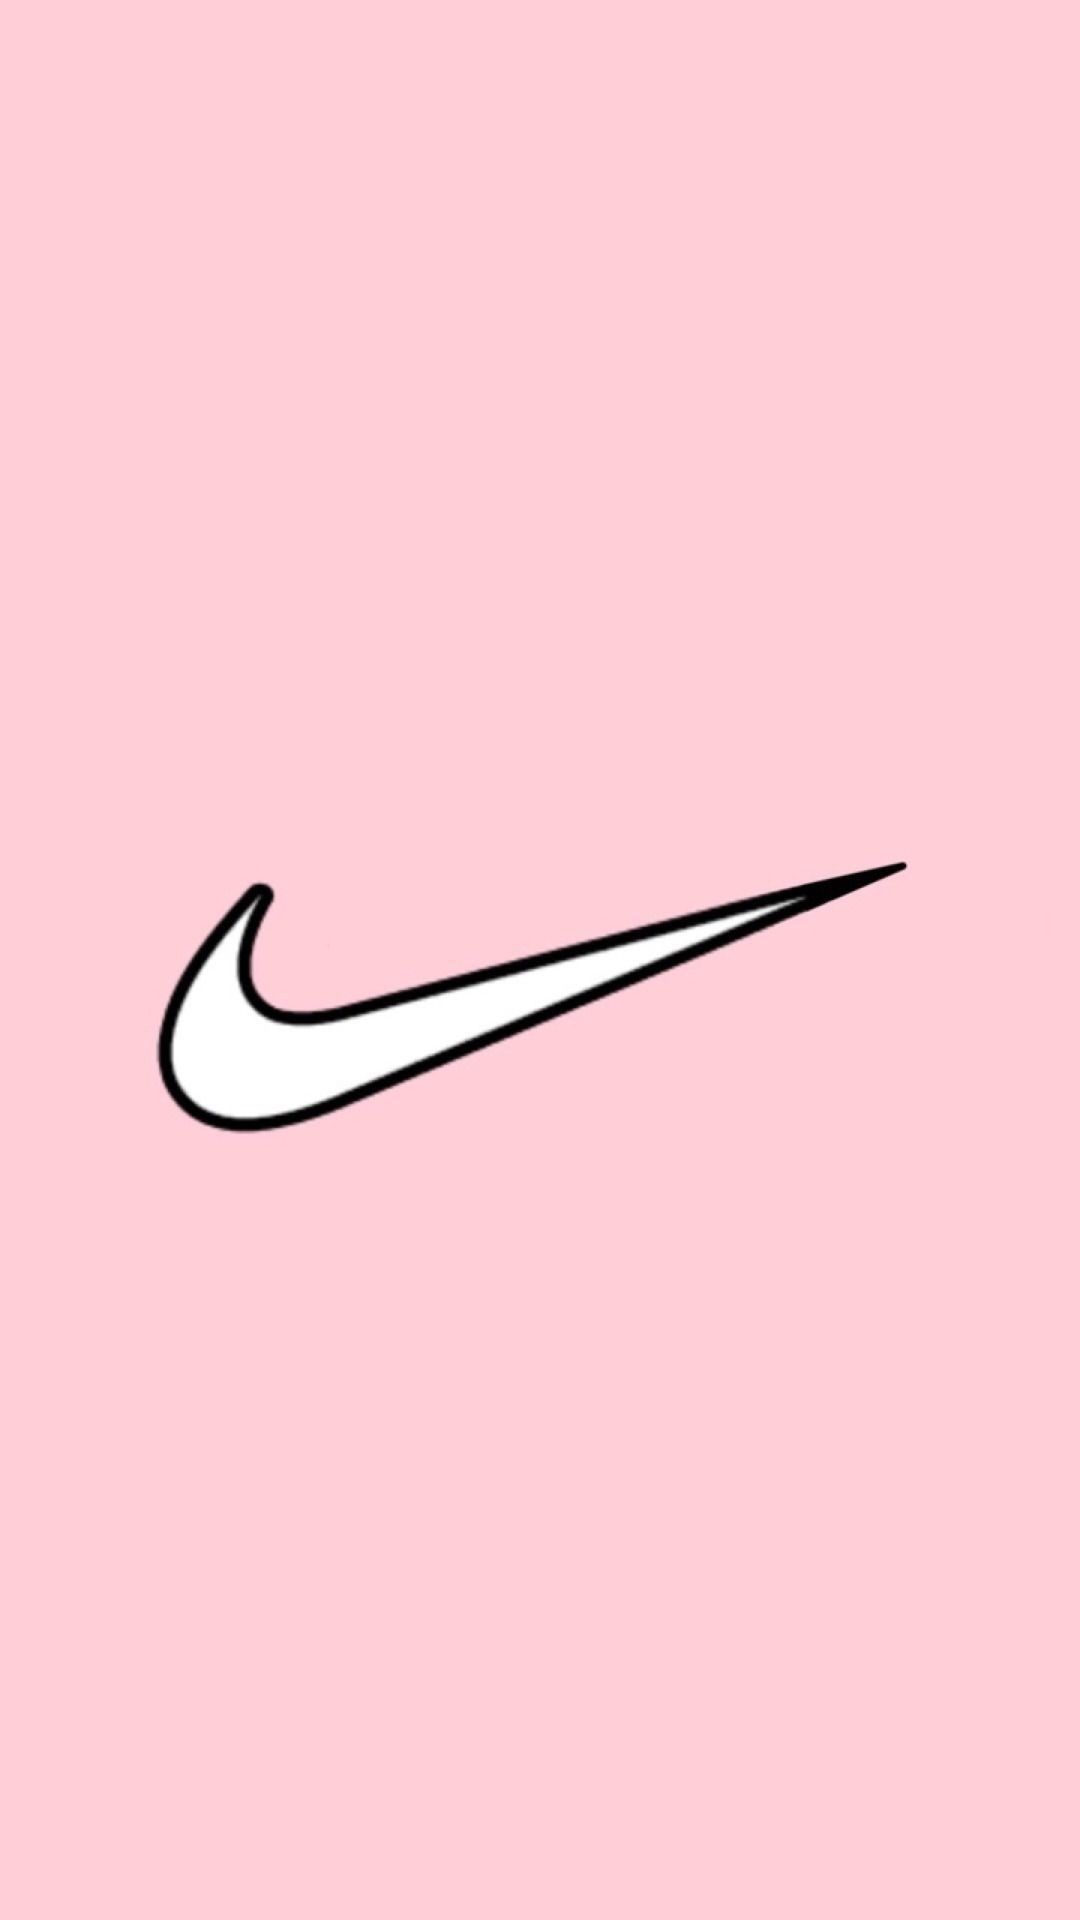 Aesthetic pink Nike wallpaper for your phone or desktop background. - Nike